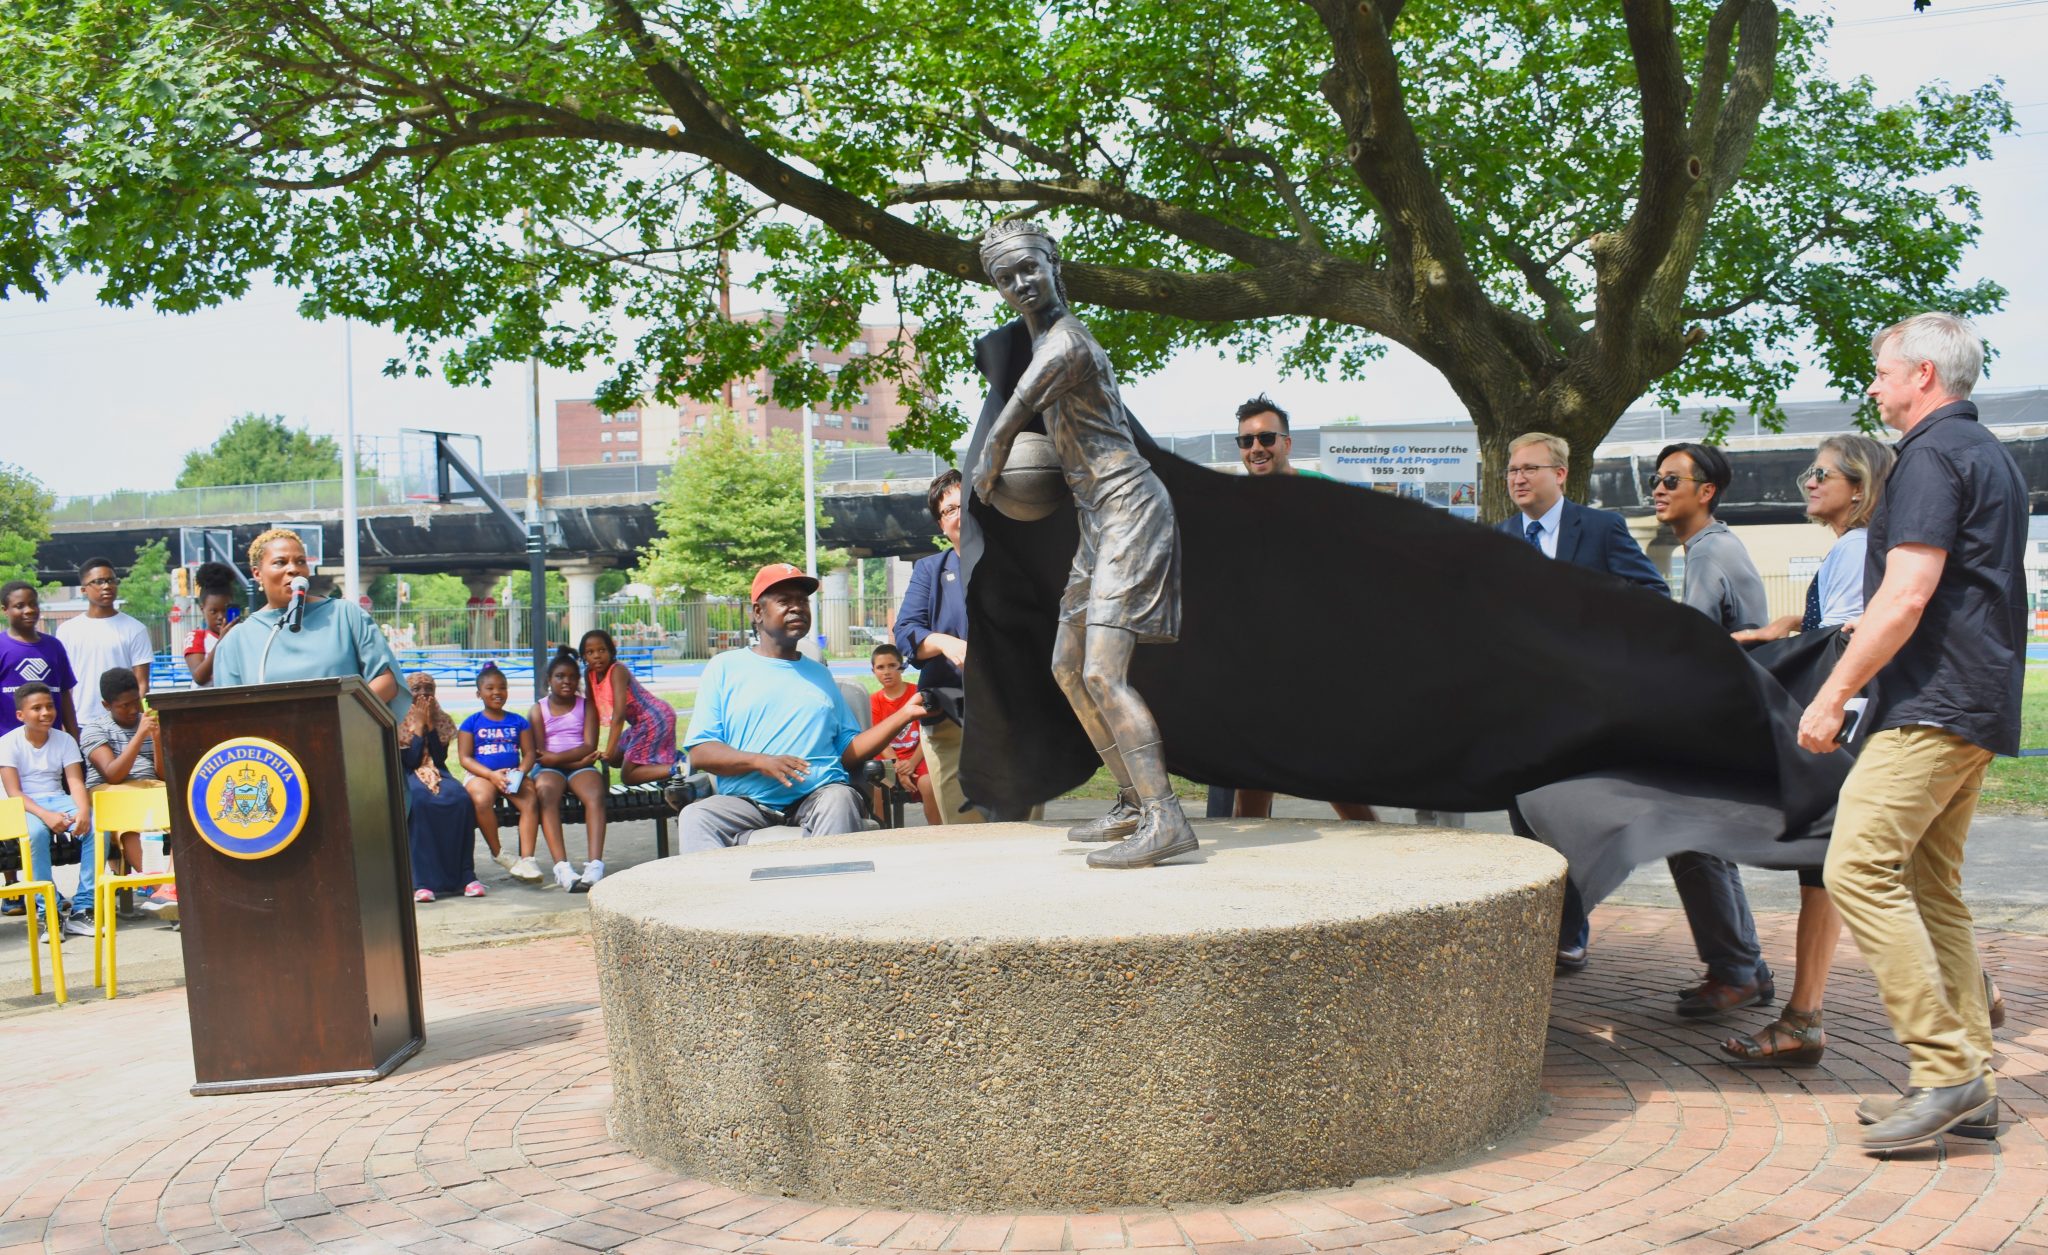 First public art portraying an individual African-American girl unveiled at Smith Playground